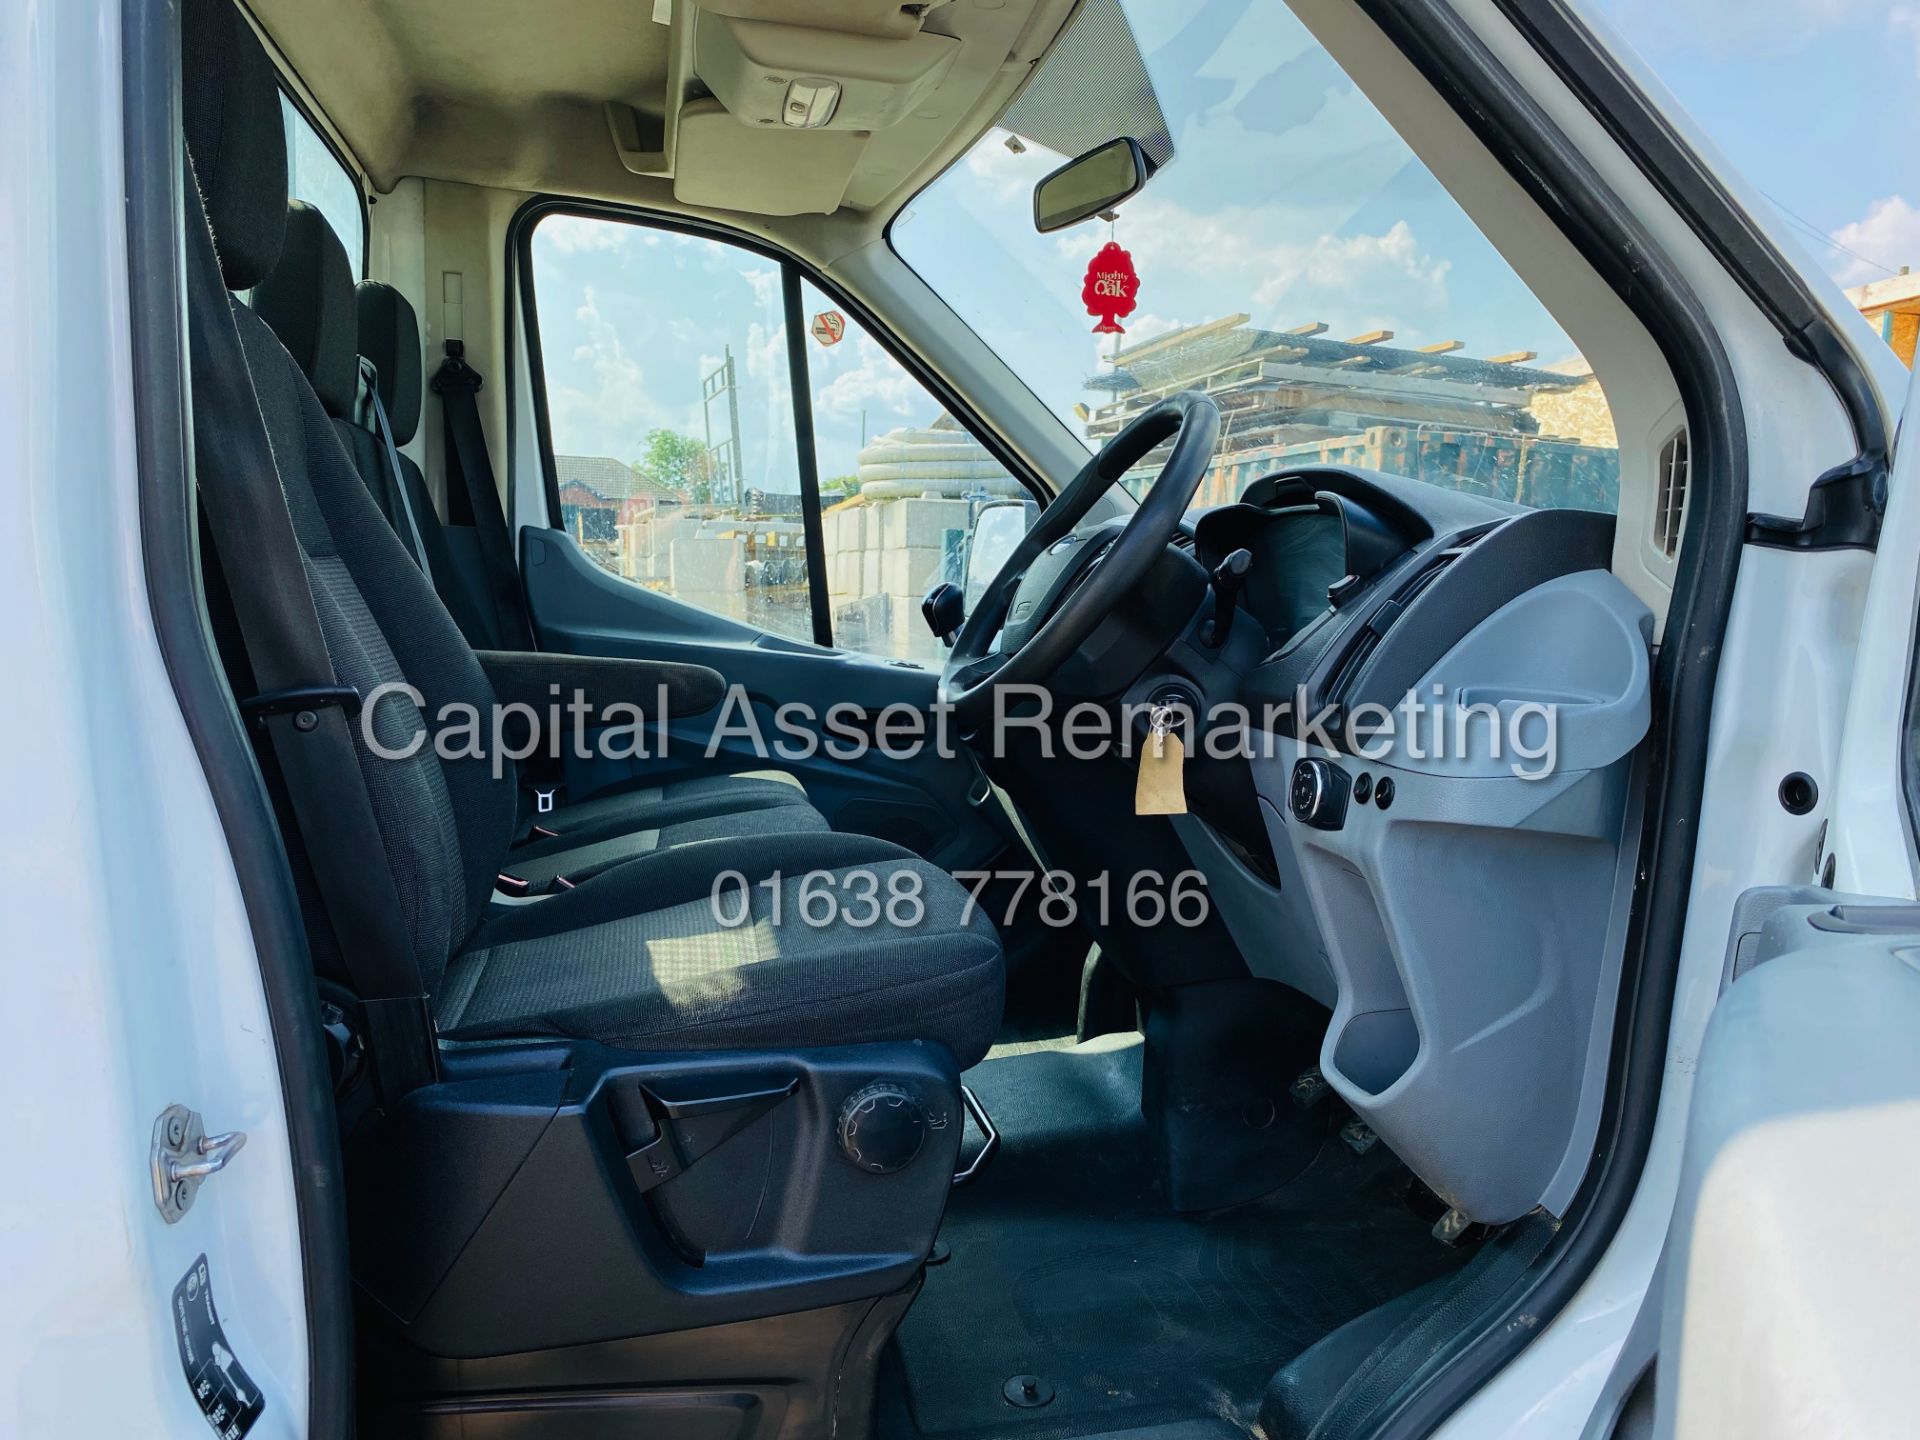 ON SALE FORD TRANSIT 2.0TDCI "130BHP" 14FT ALLOY DROPSIDE (2019 MODEL) TAIL-LIFT AIR CON 1 OWNER FSH - Image 14 of 20